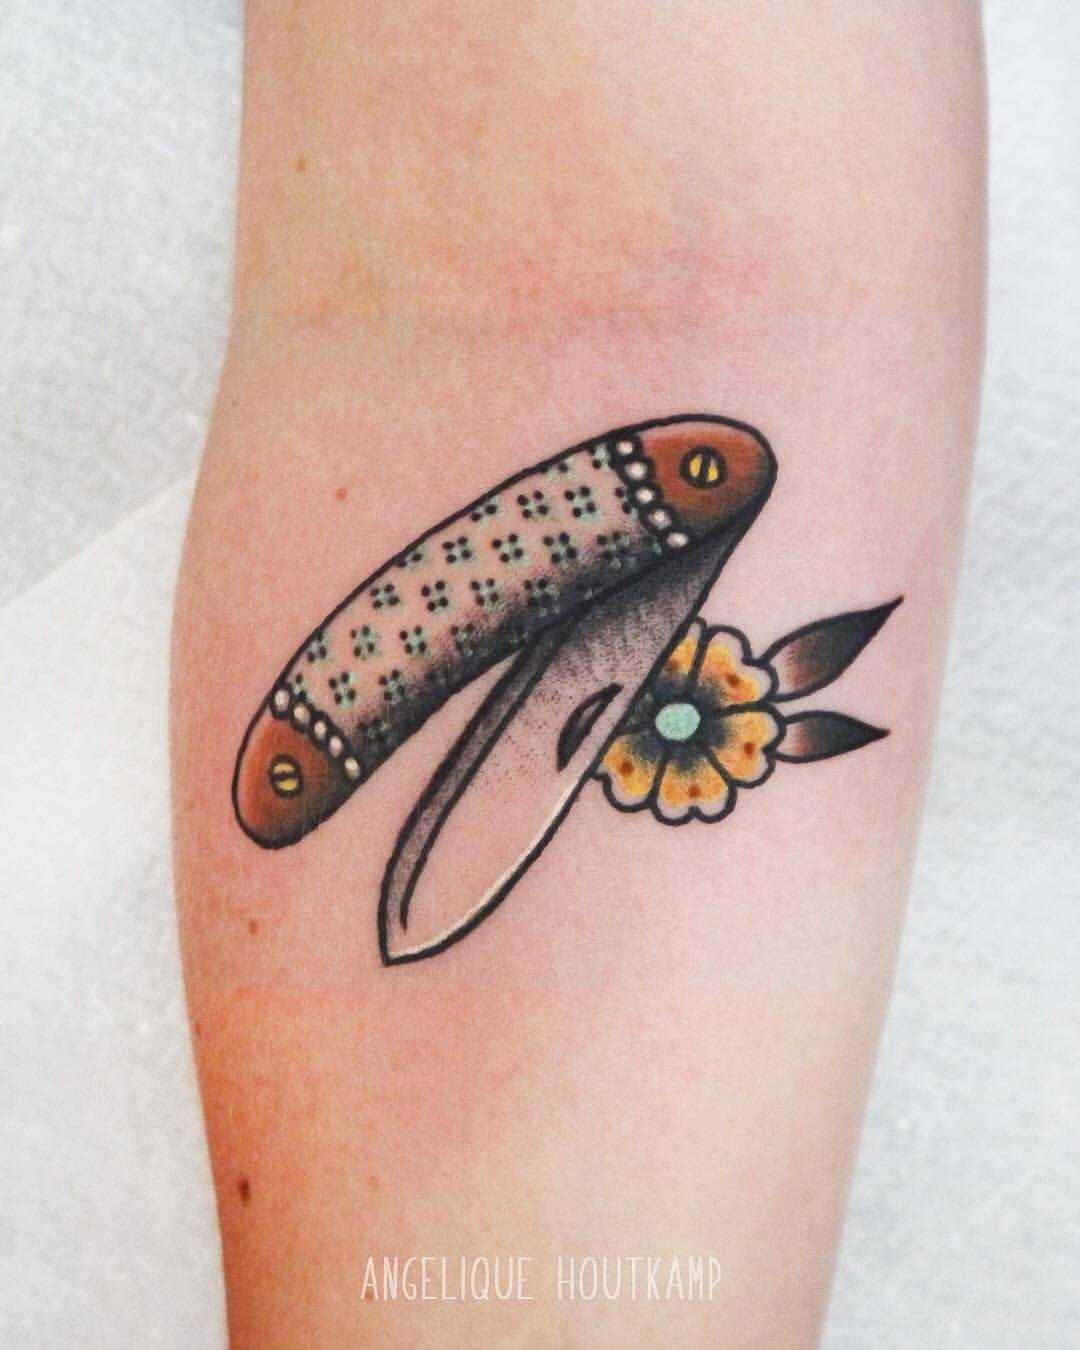 Pocket knife tattoo by by Angelique Houtkamp - Tattoogrid.net